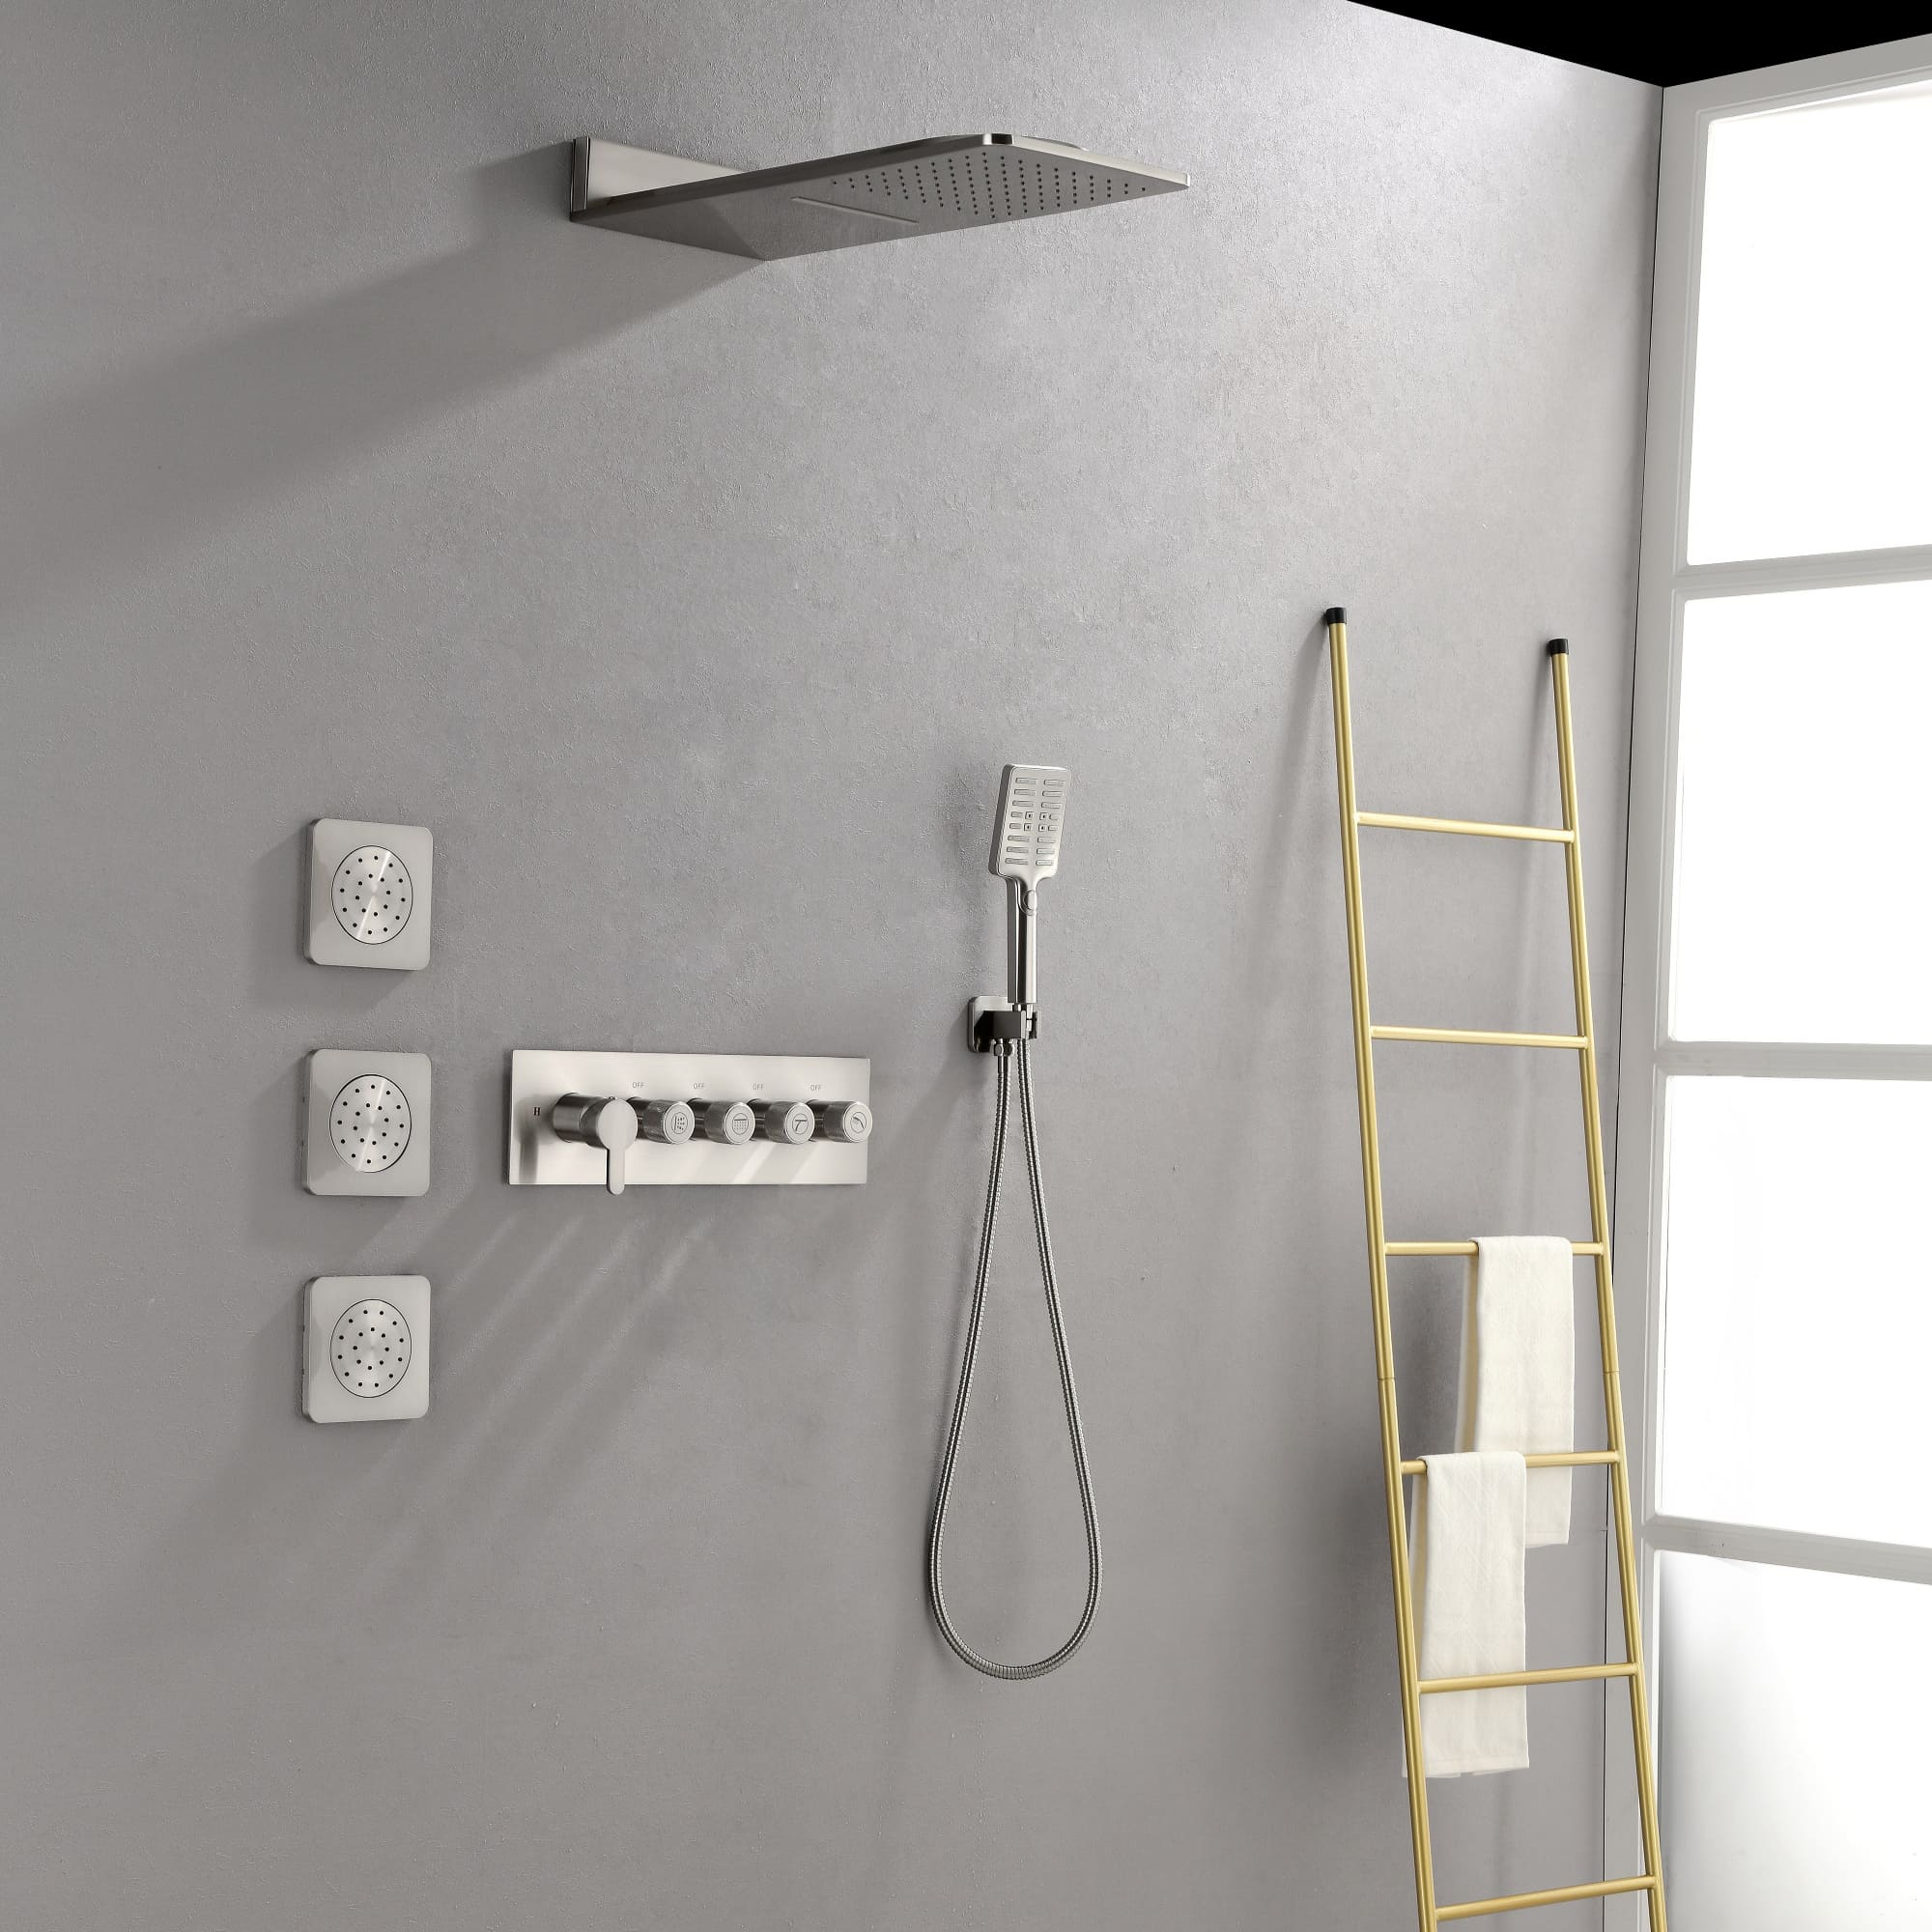 Wall Mounted Waterfall & Rainfall Shower System With 3 Body Spray Jets & Handheld Shower